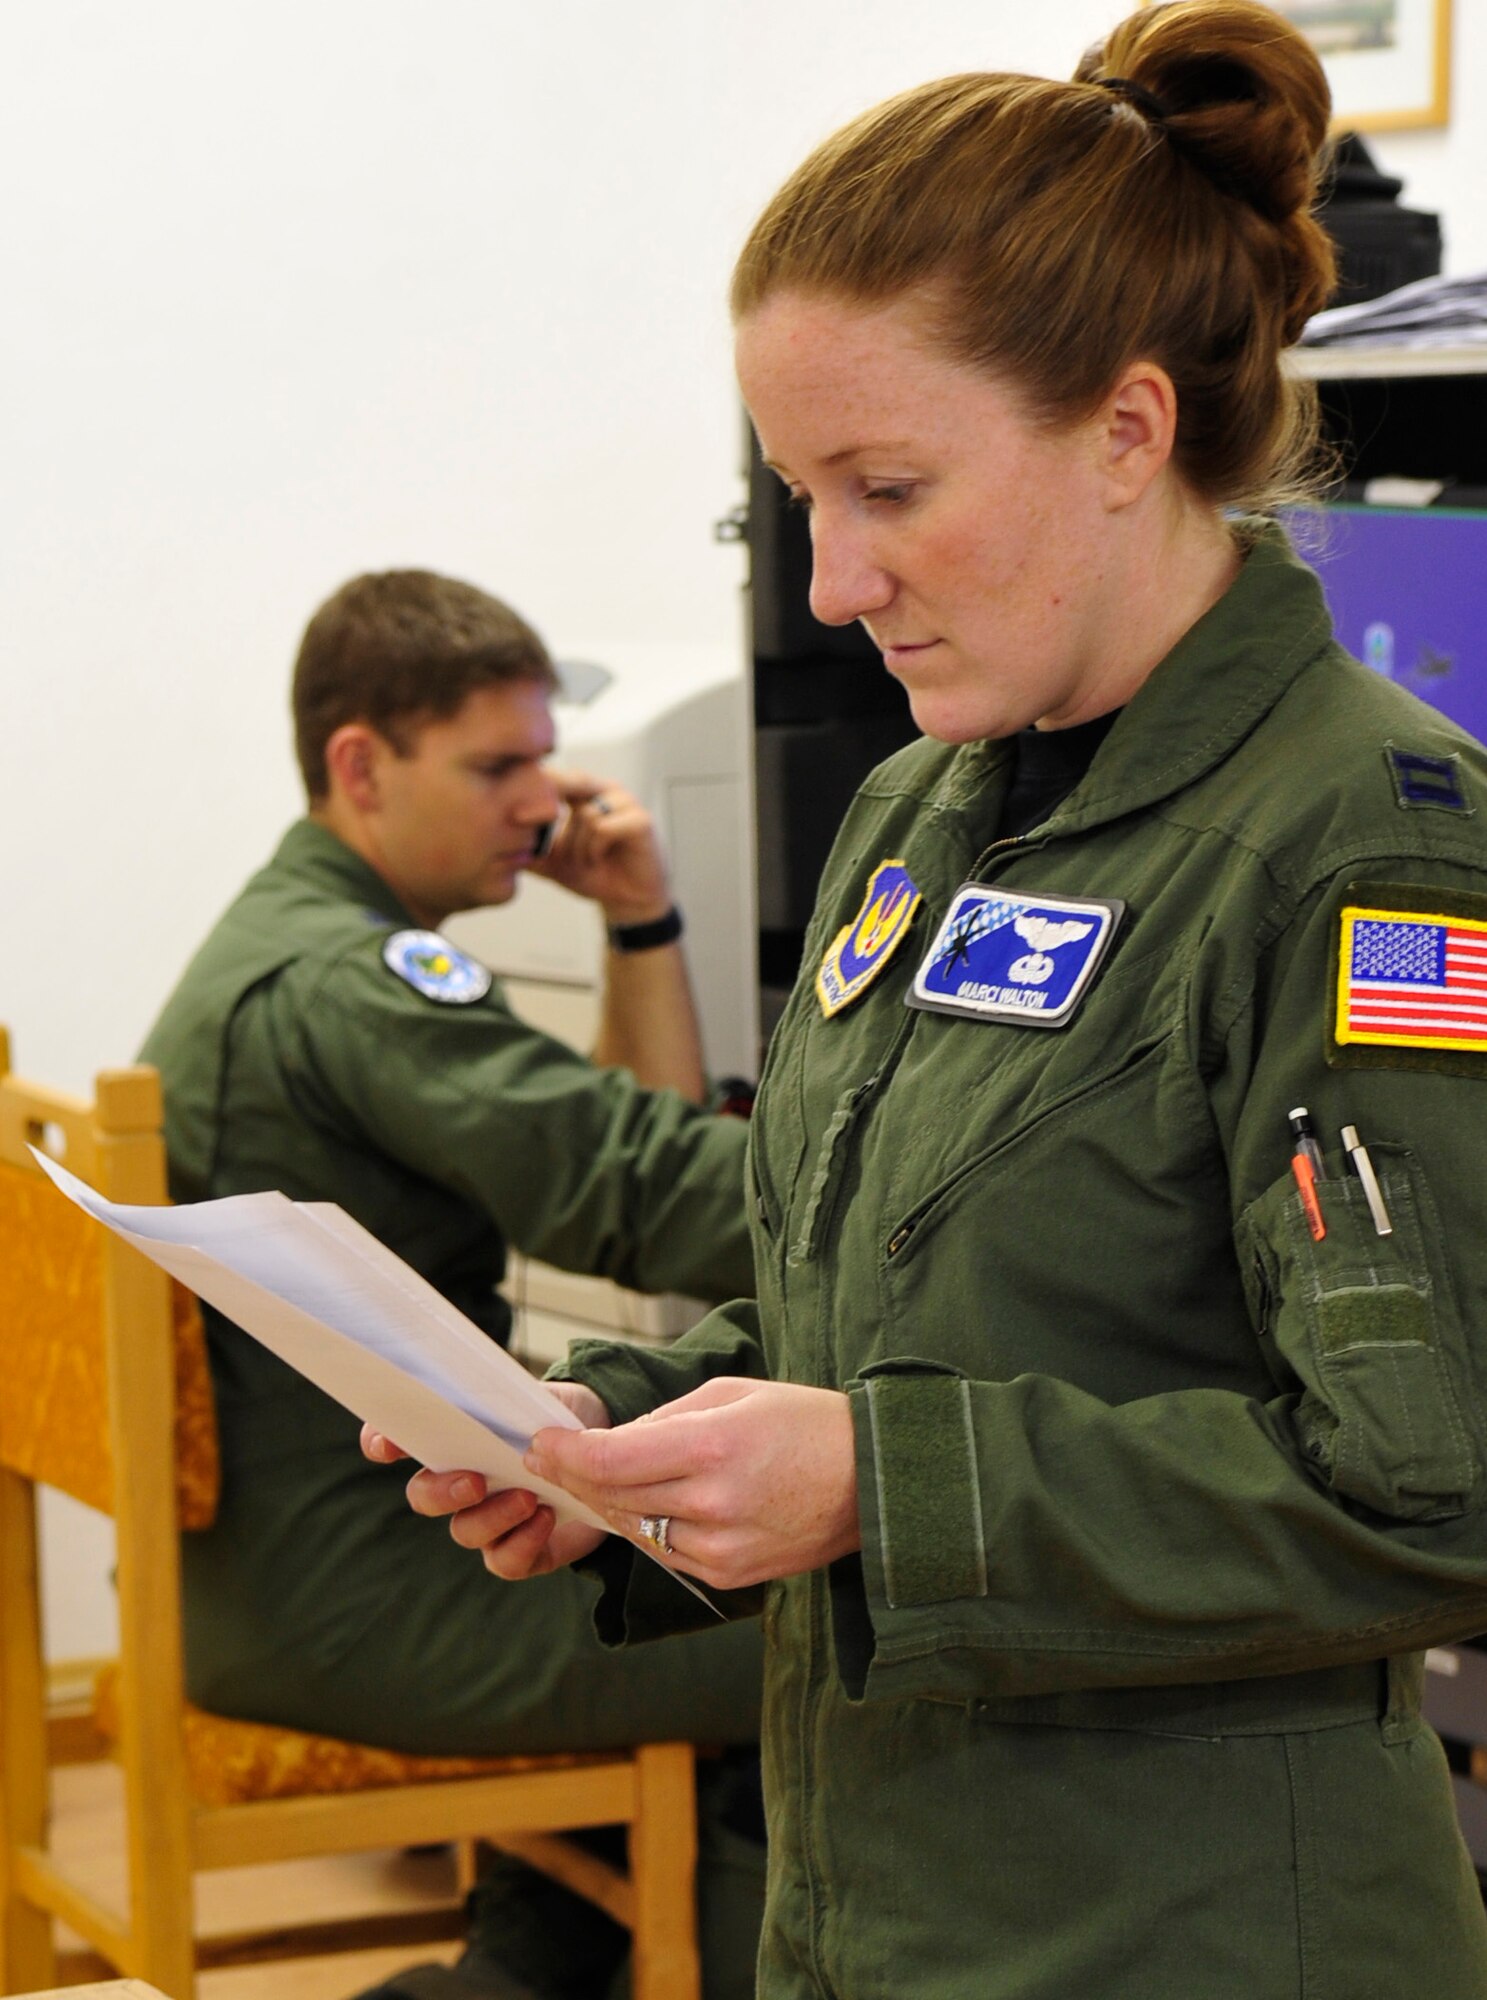 U.S. Air Force Captains Marci and Dan Walton, 37th Airlift Squadron pilots, work side-by-side in the command center of Carpathian Spring 2011, Airlift Base Otopeni, Romania March 17, 2011. Capt. Marcie Walton is serving as chief of tactics and Capt. Dan Walton as mission commander of this exercise. This is the first time the married couple has had the opportunity to work together this closely. Carpathian Spring 2011 is a building partnership capacity exercise where members of the U.S. military join their Romanian counterparts to learn from one another and strengthen alliances. (U.S. Air Force Photo by Tech Sgt. Jocelyn L. Rich)